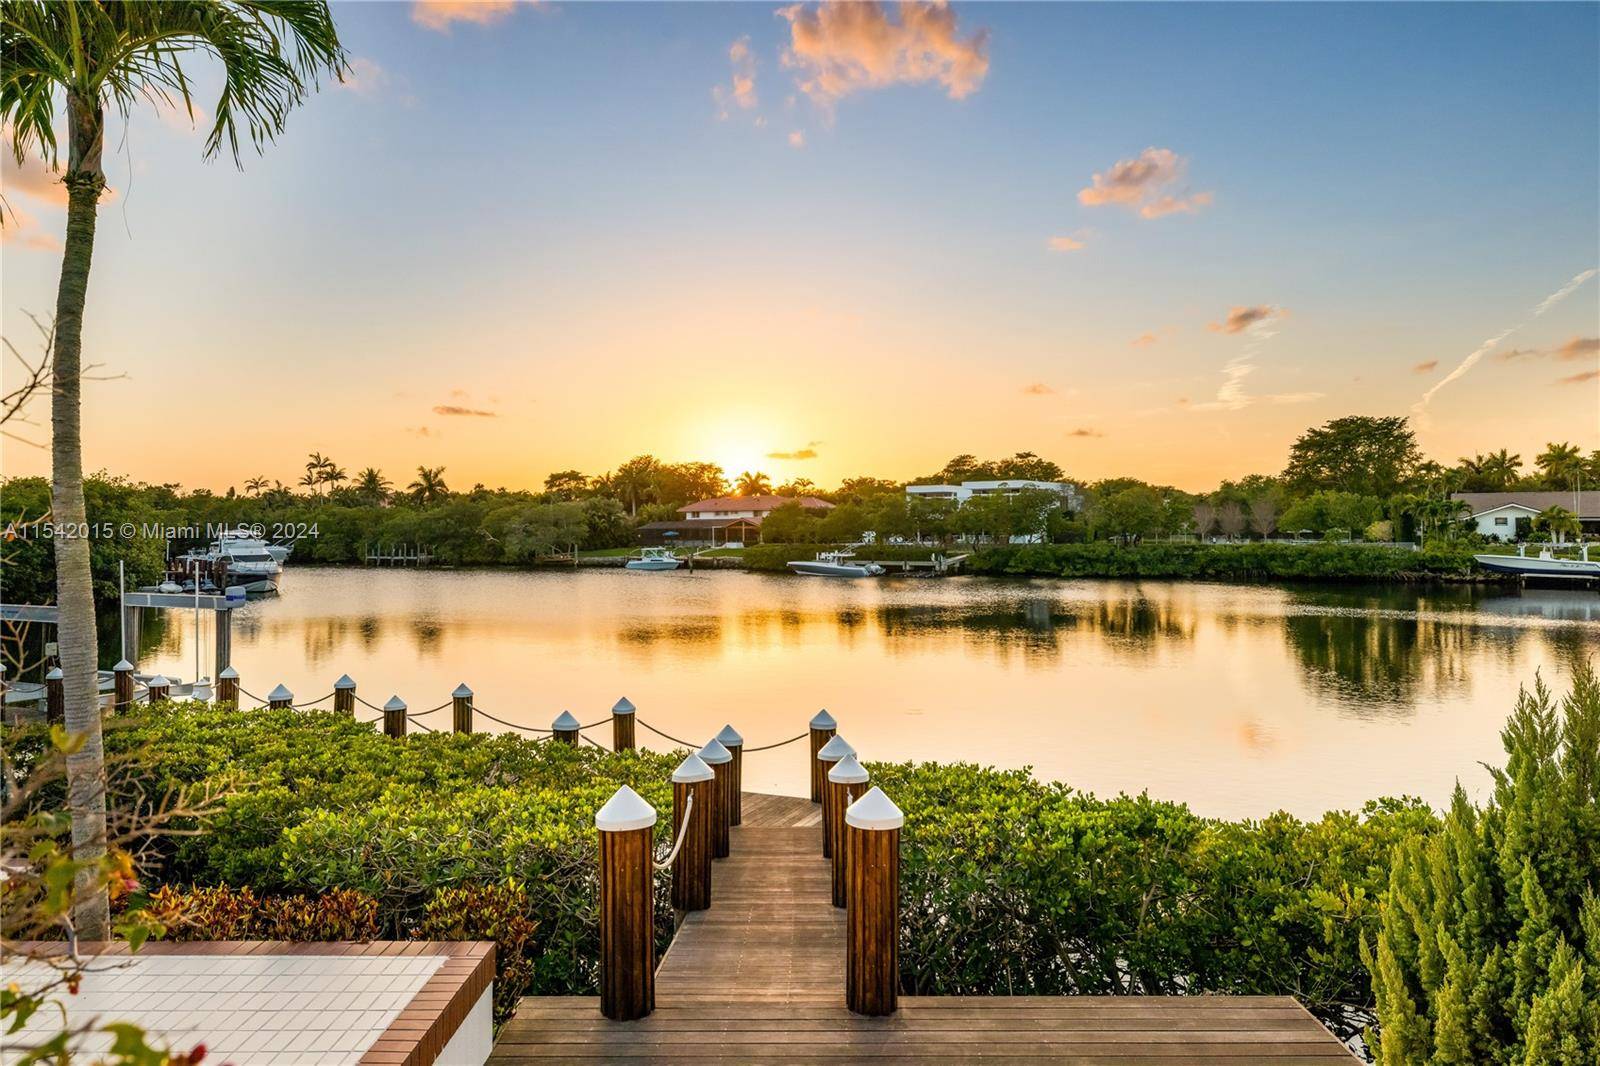 Be amazed by the breathtaking water views from this home with over 300 feet waterfront in Islands of Cocoplum.